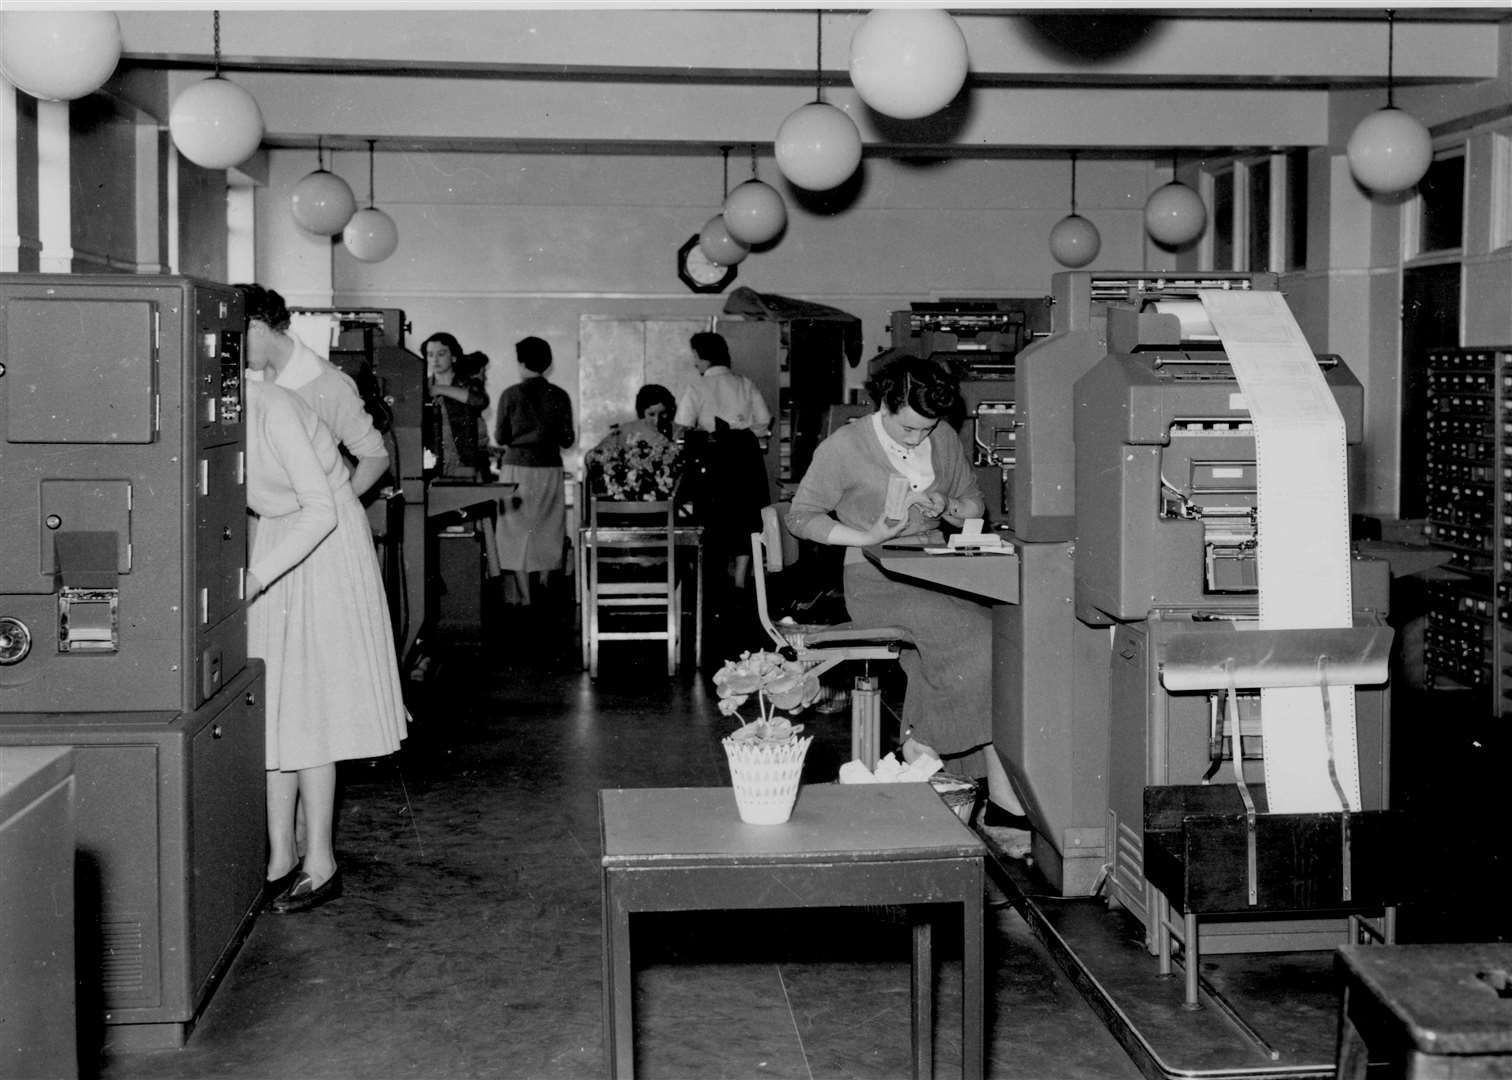 Telephone House, Canterbury, in May 1957. On the left, reported the Kentish Gazette, is the electronic multiplying punch - a version of the so-called electronic brain - and on the right the tabulator which processes the accounts